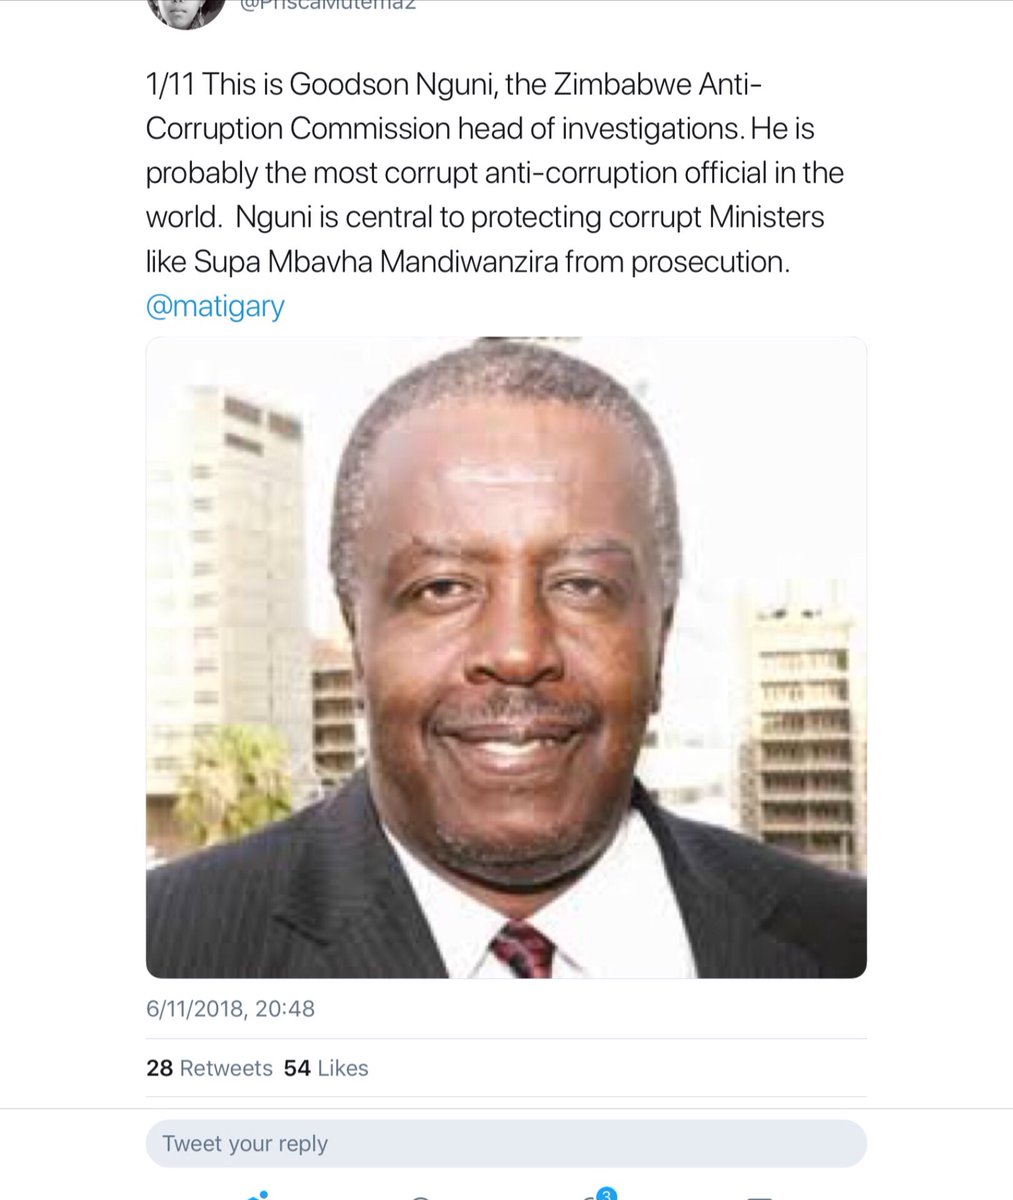 21. Notwithstanding the evidence of corruption staring in the face of  @ZACConline , they still didn’t arrest the ex-ICT Minister! How can any reasonable person dismiss the allegations of being bribed leveled against ex-ZACC Commissioner, Nguni?  @matandamoyo  @thabani_vusa  @MoJLPA